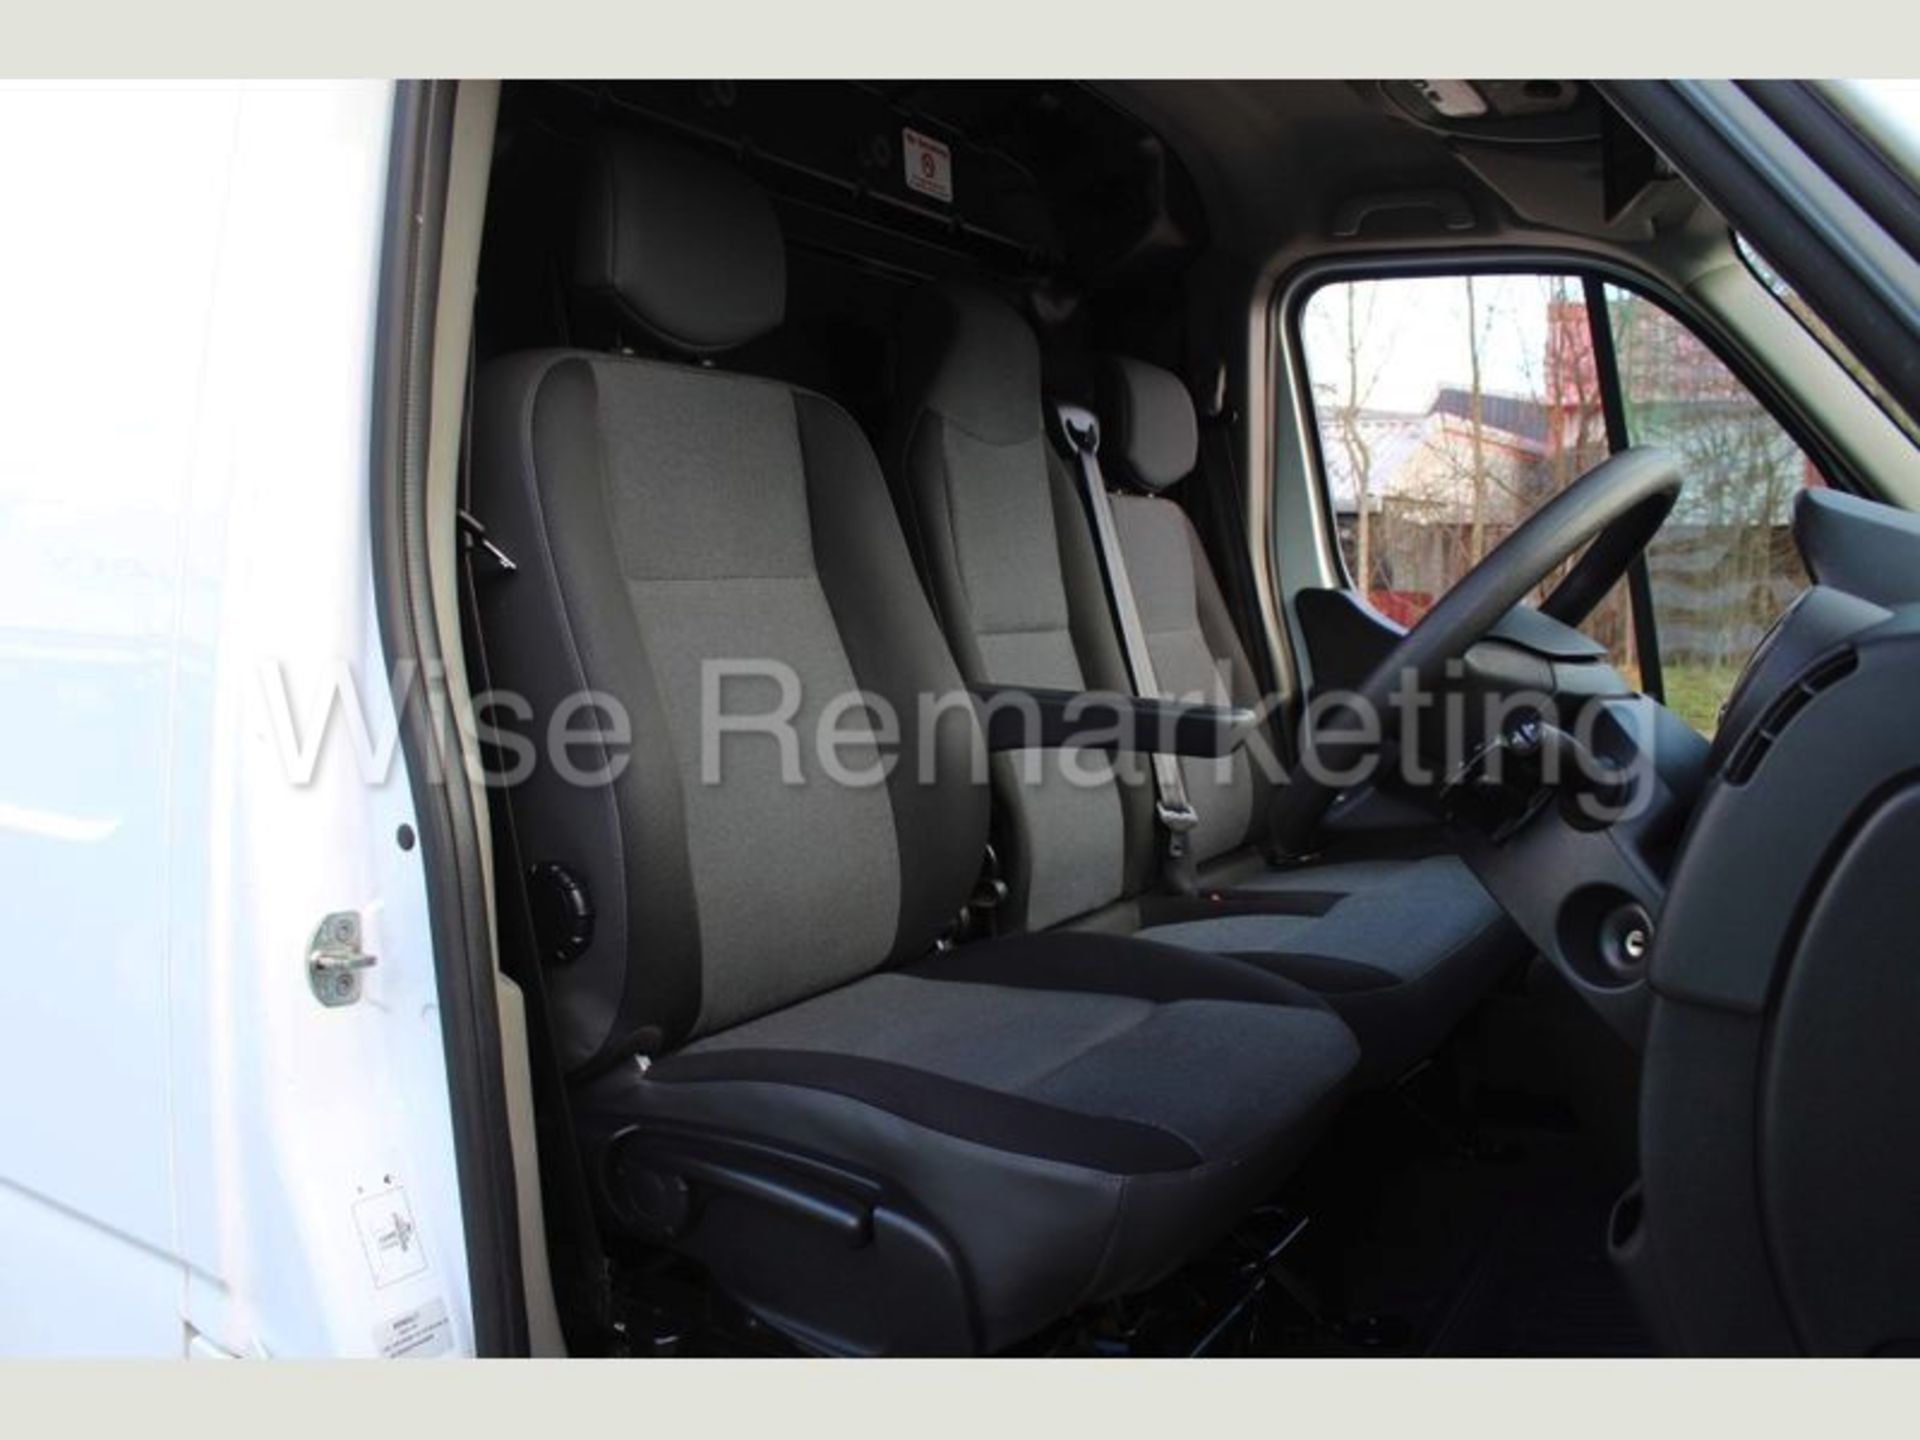 Renault Master L3H3 *LWB - Super Roof* (2018 ~ Euro 6 Compliant) Air Con - Electric Pack (1 Owner) - Image 10 of 11